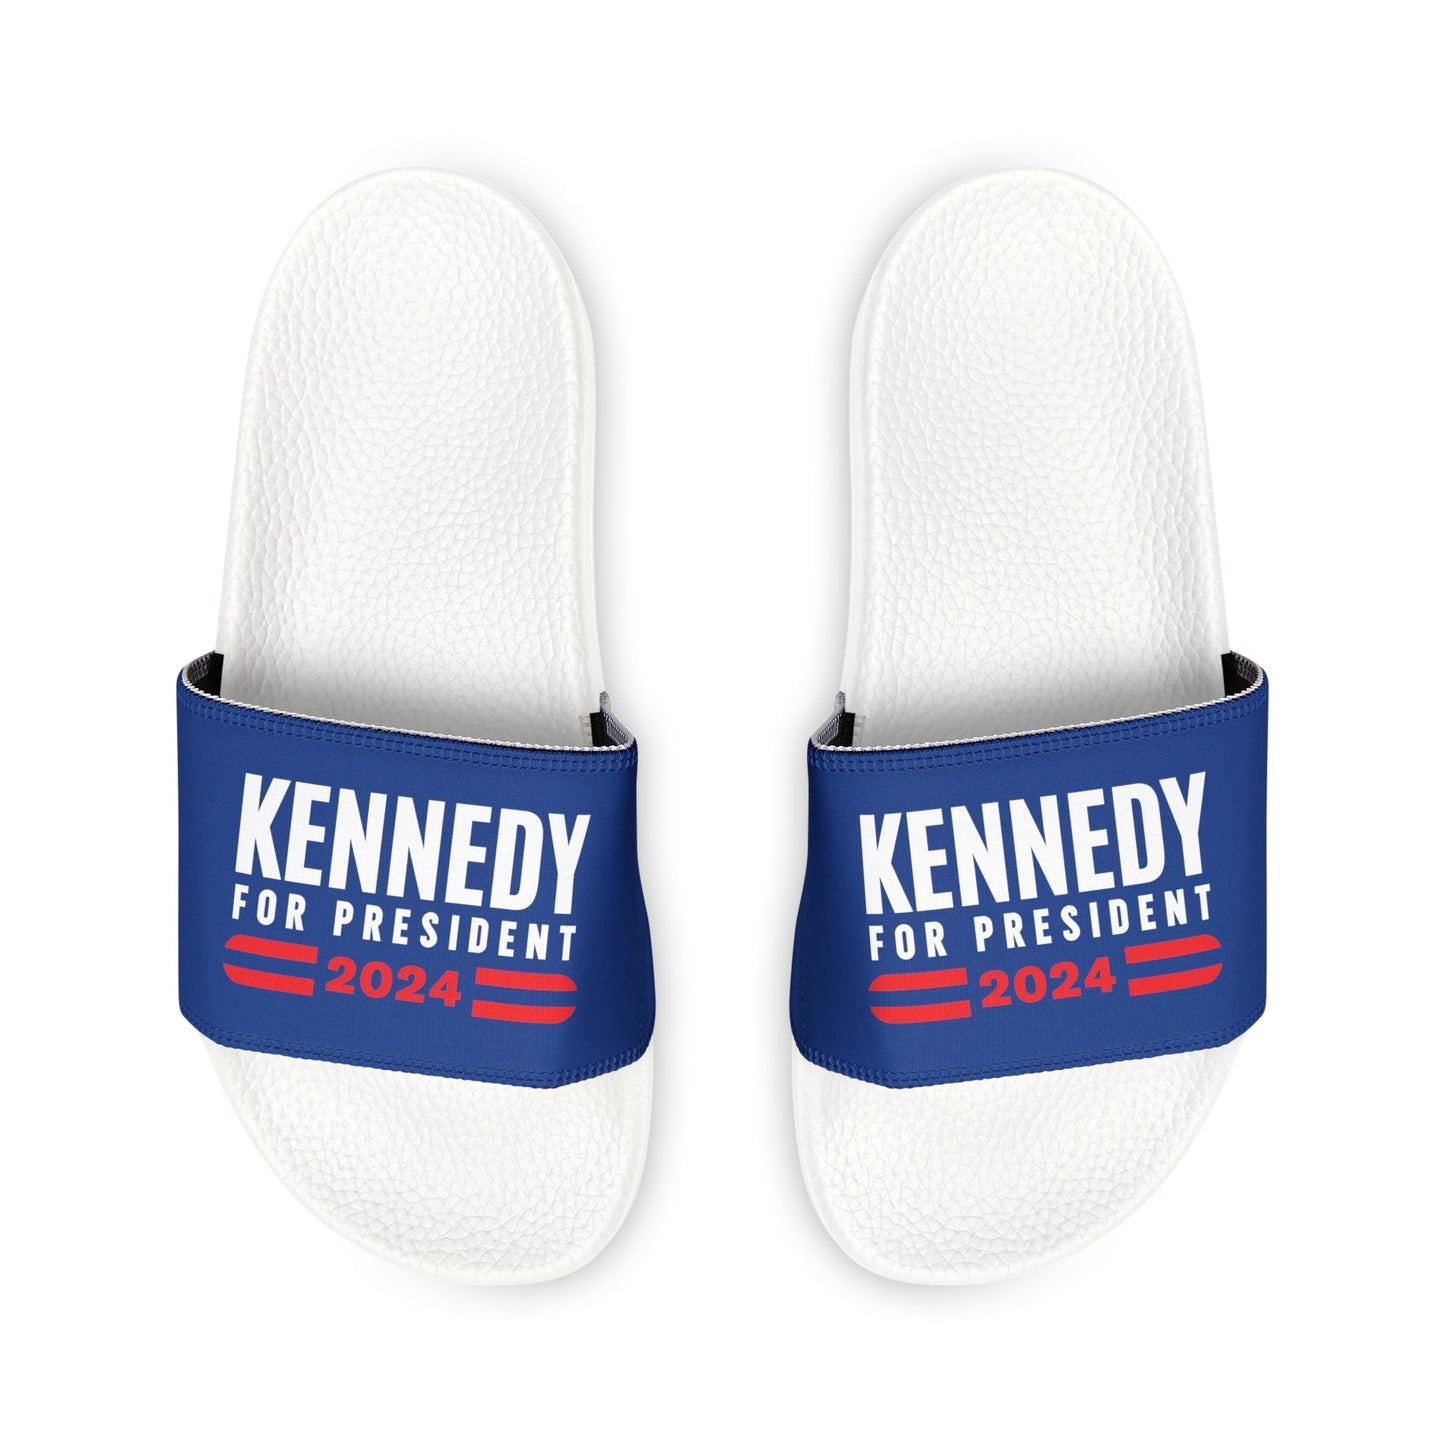 Kennedy for President 2024 Women's Slides - TEAM KENNEDY. All rights reserved